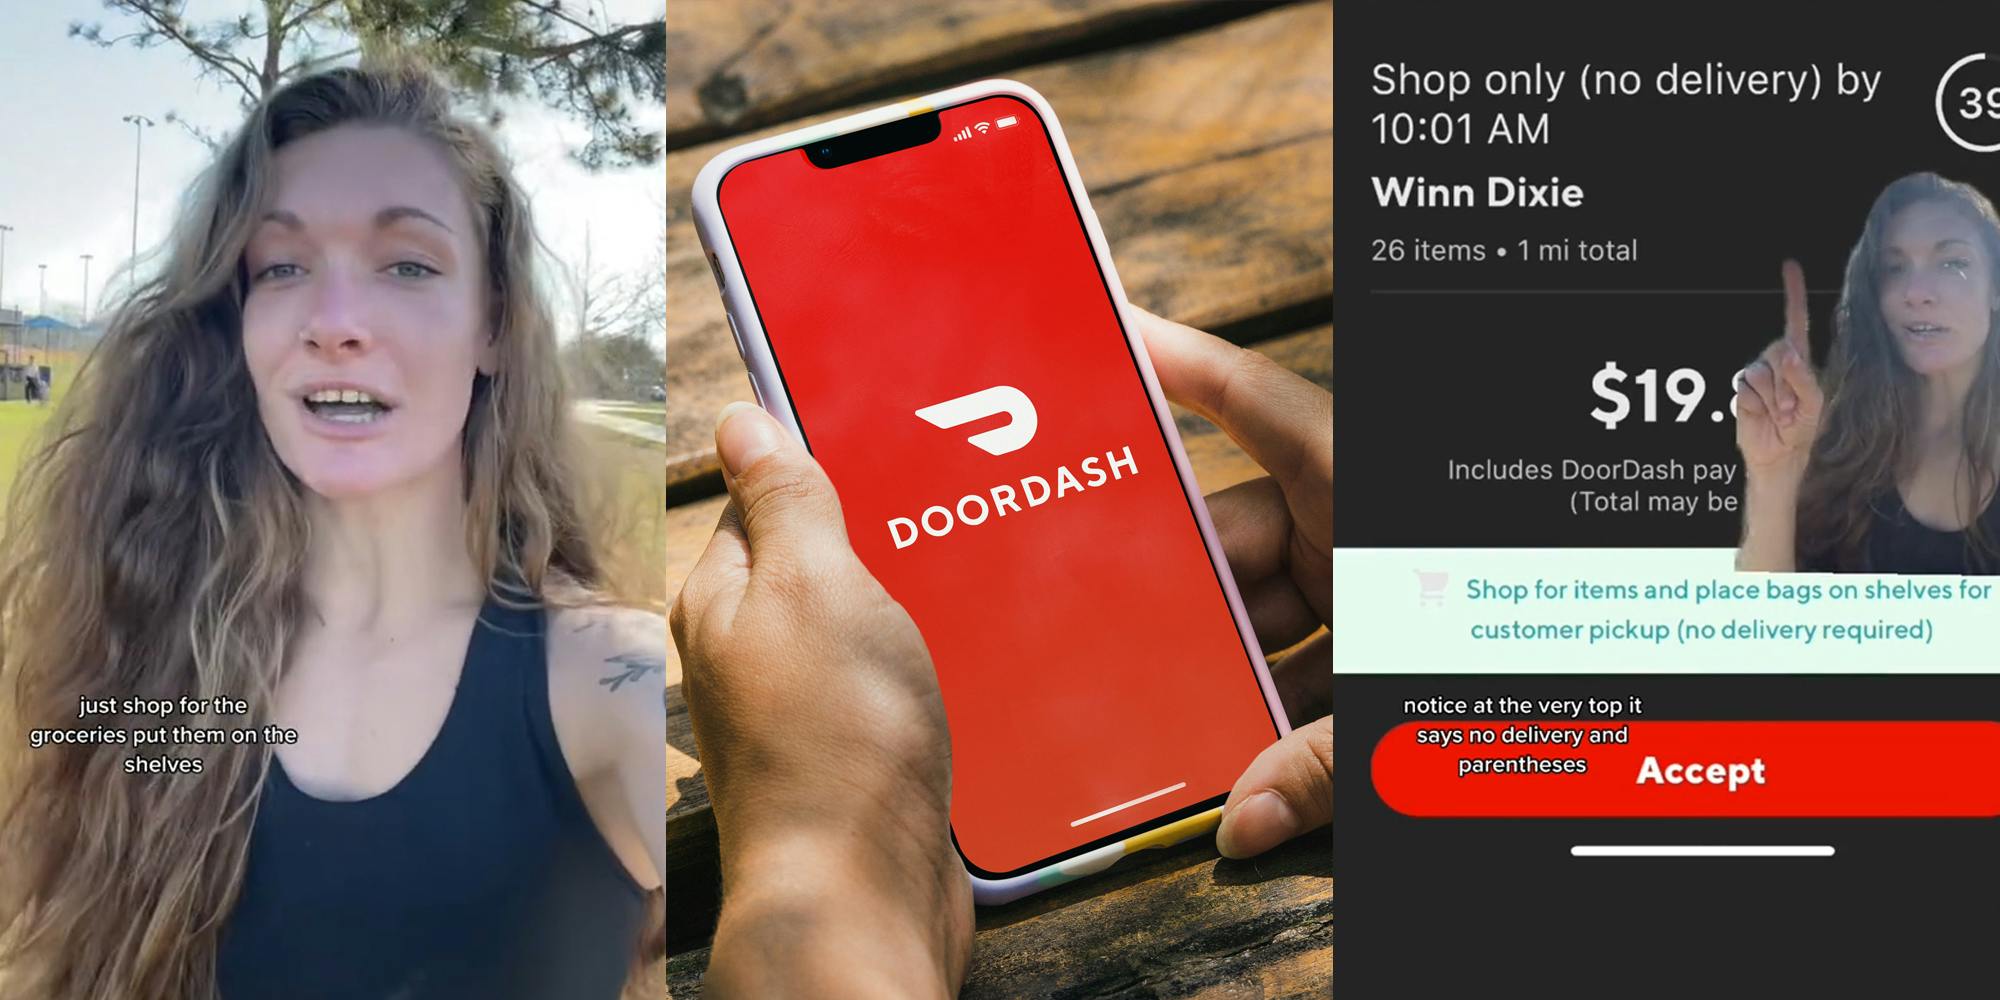 DoorDasher speaking outside with caption "just shop for the groceries put them on the shelves" (l) DoorDash on phone screen in hand in front of wooden background (c) DoorDasher greenscreen TikTok over Shop Only request with caption "notice at the very top it says no delivery and parentheses" (r)